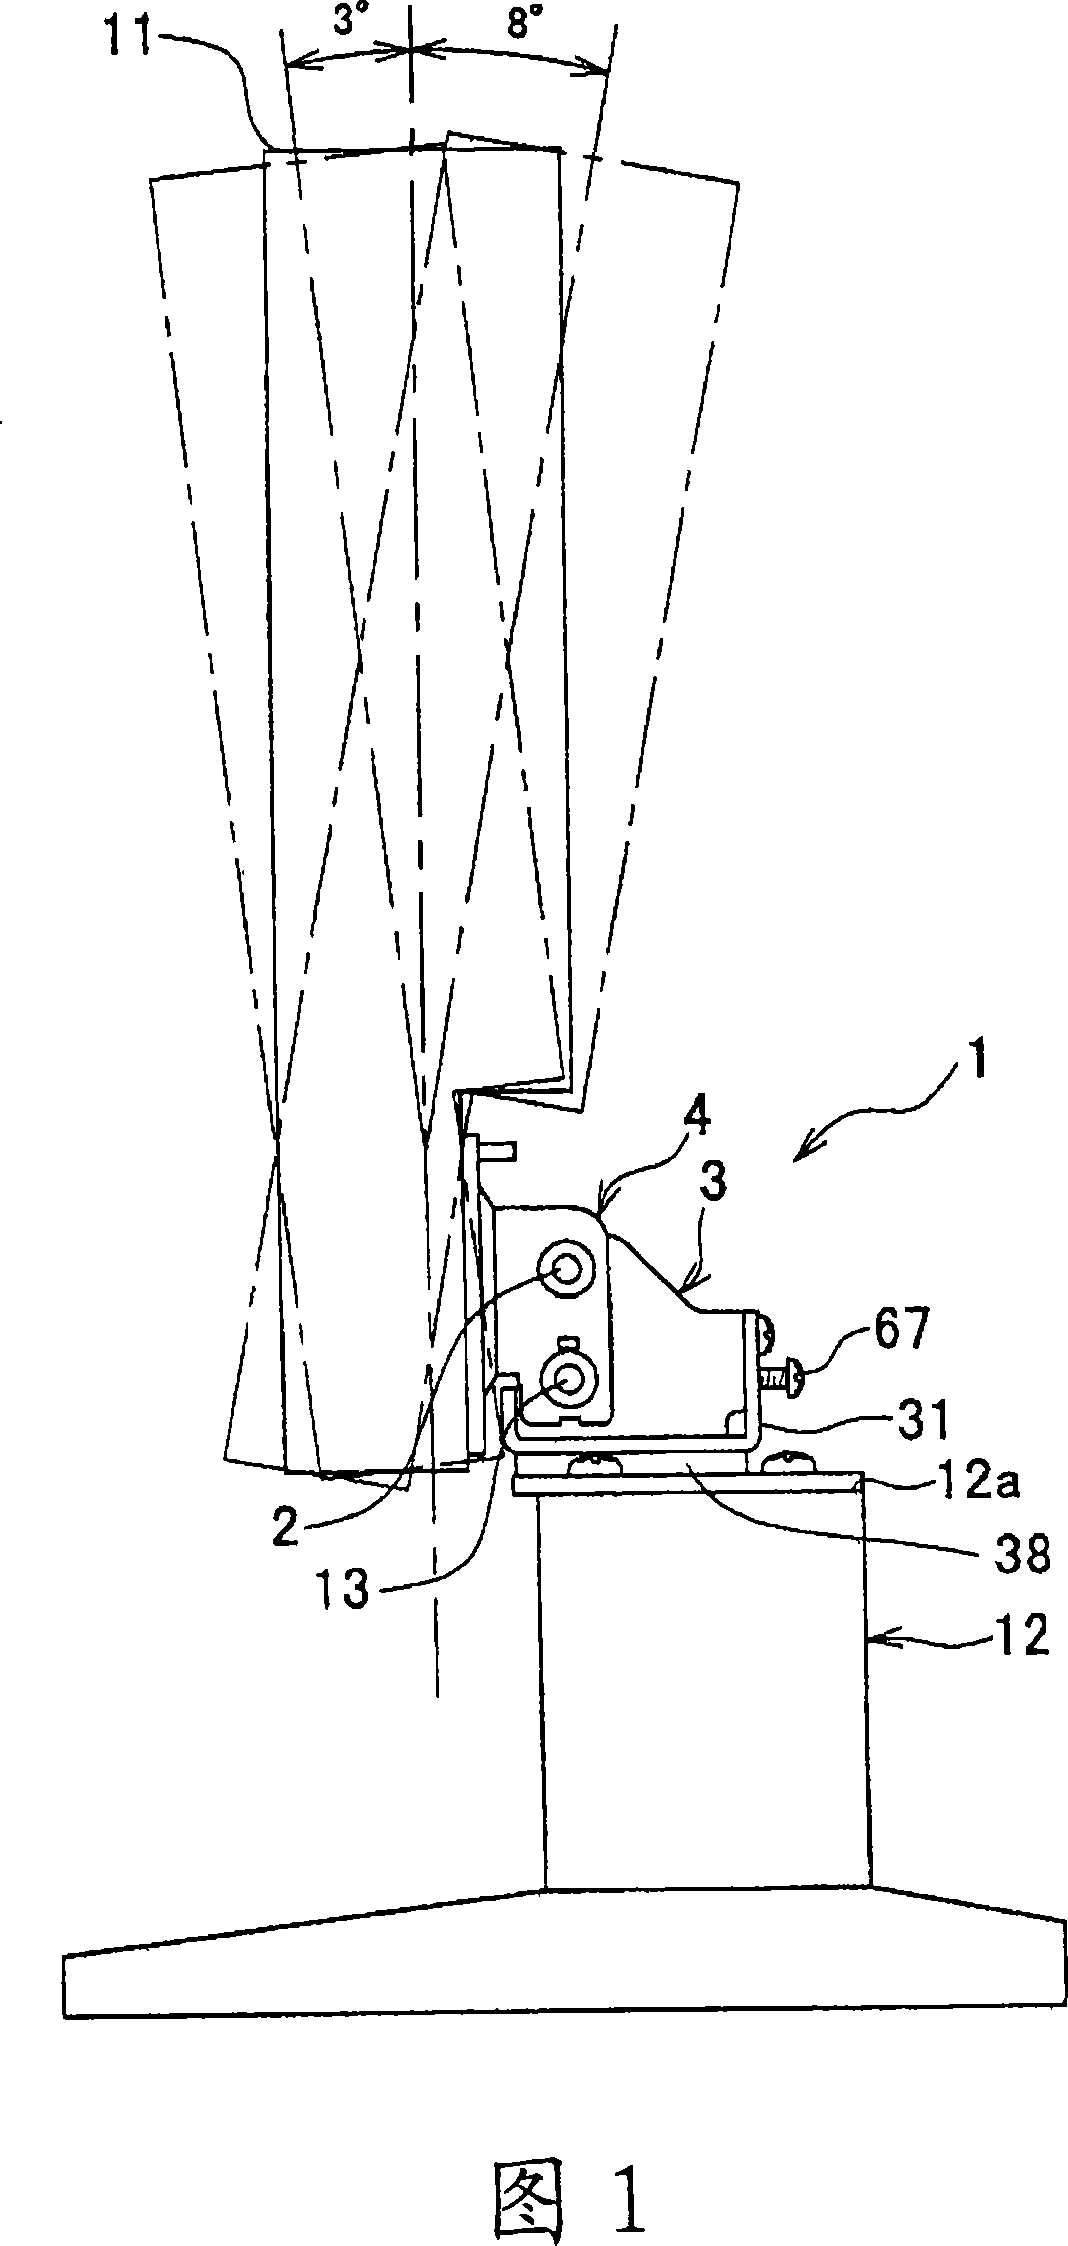 Display supporting mechanism